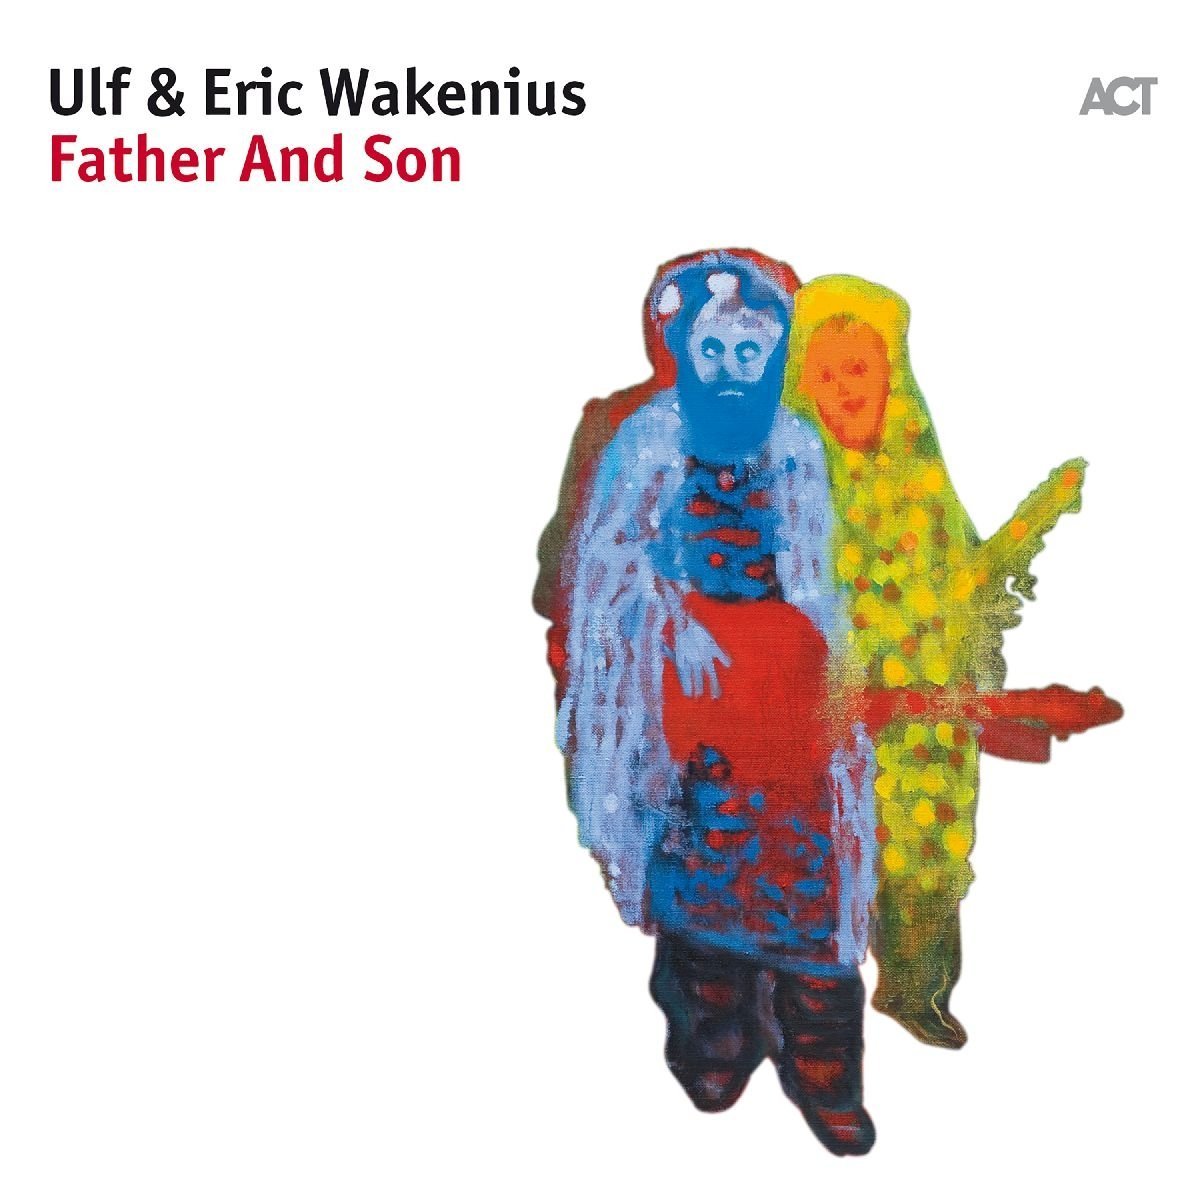 Ulf & Eric Wakenius - Father And Son